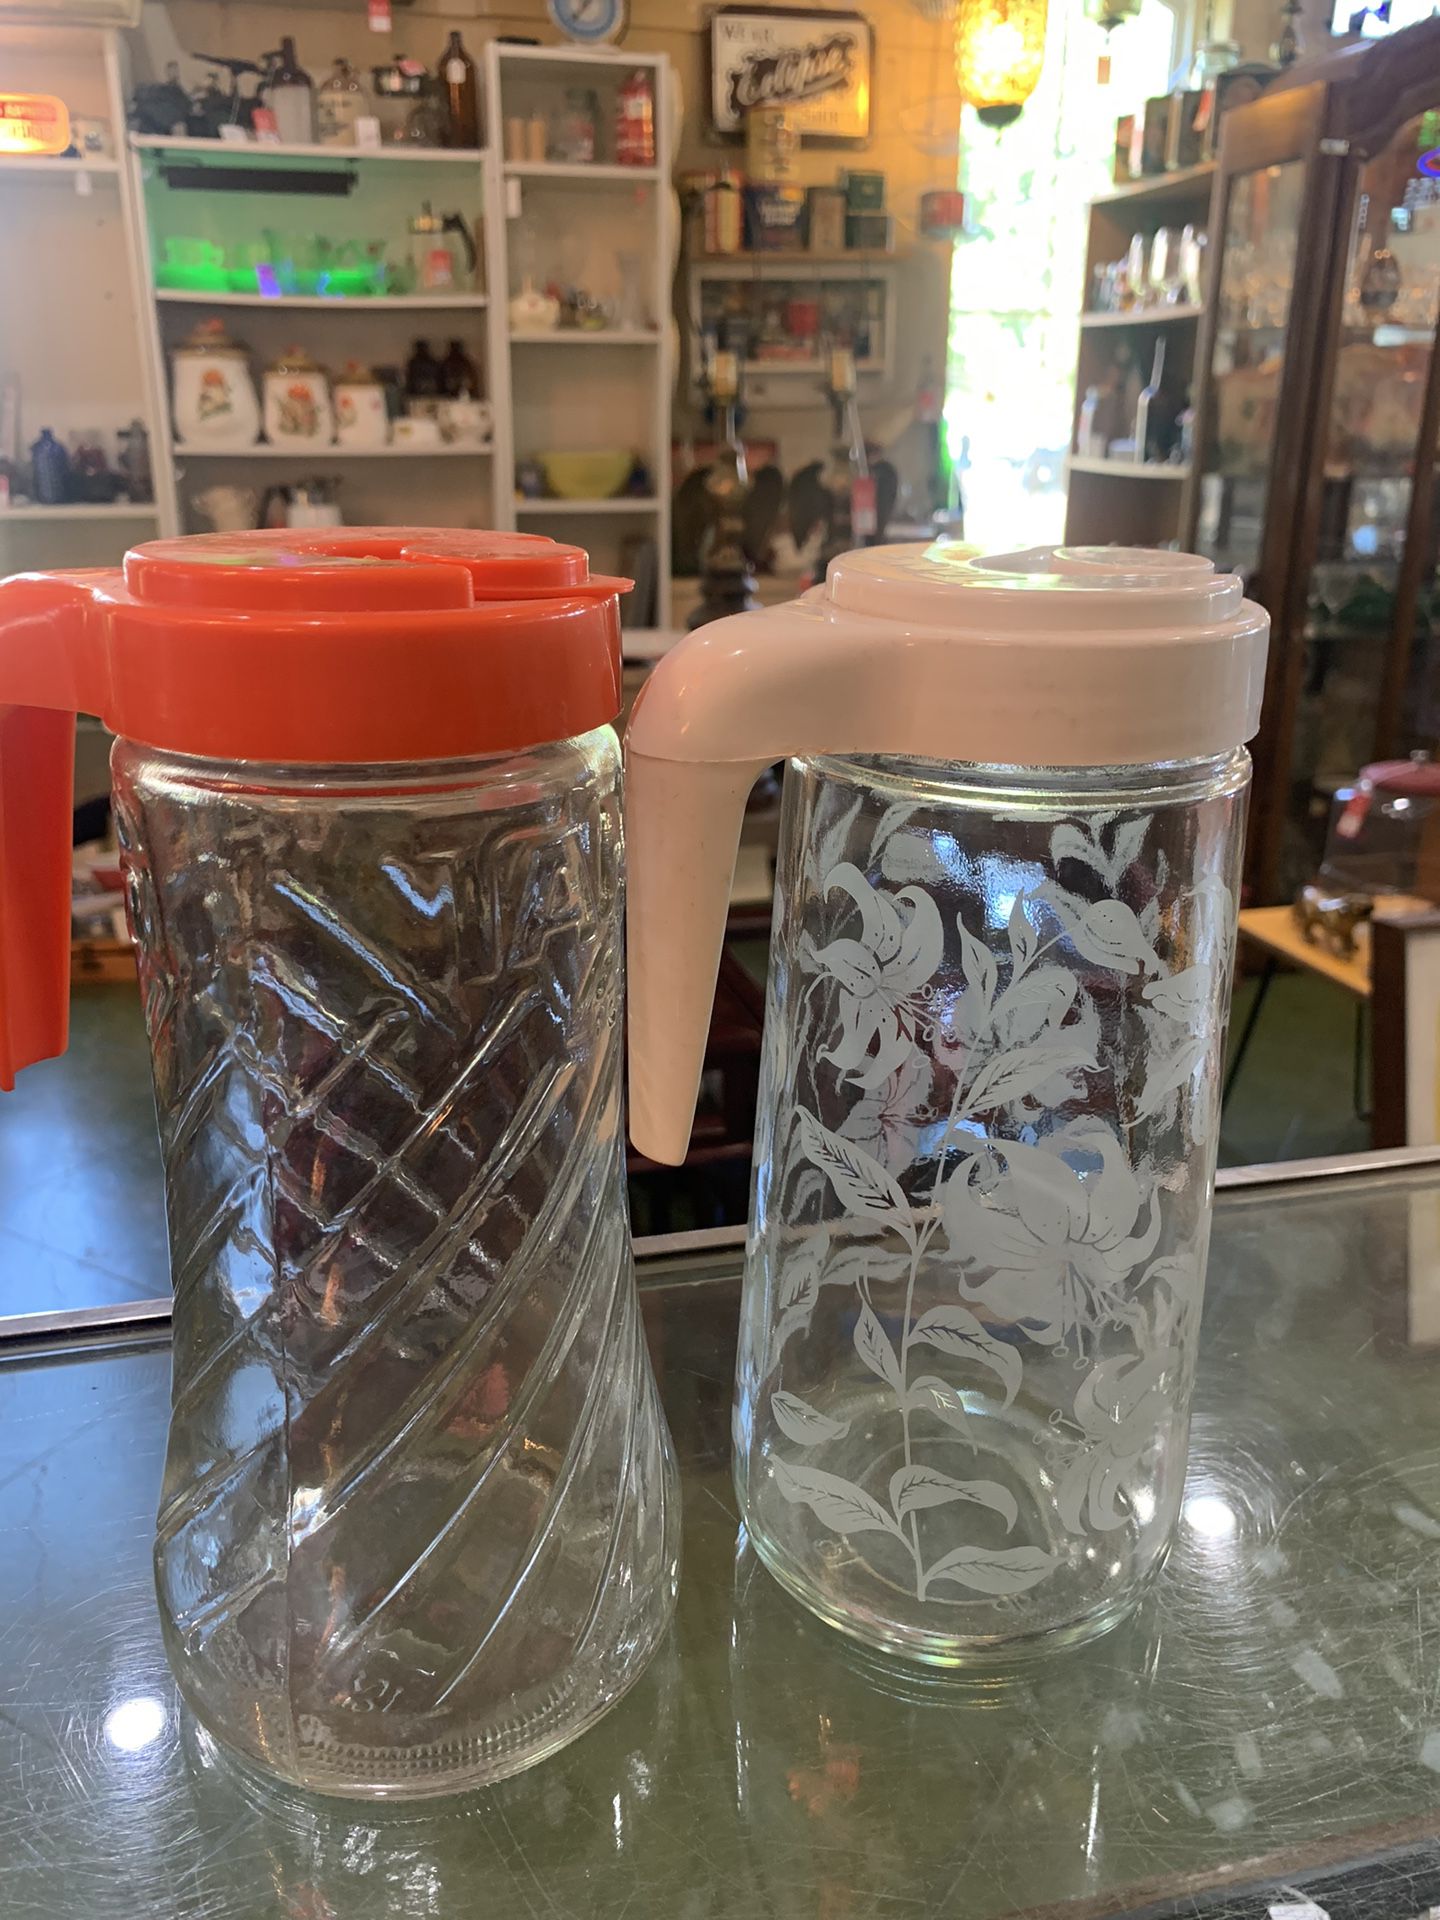 1960s1970s TANG PITCHERS. 14.00 each.  Johanna at Antiques and More. Located at 316b Main Street Buda. Antiques vintage retro furniture collectibles m